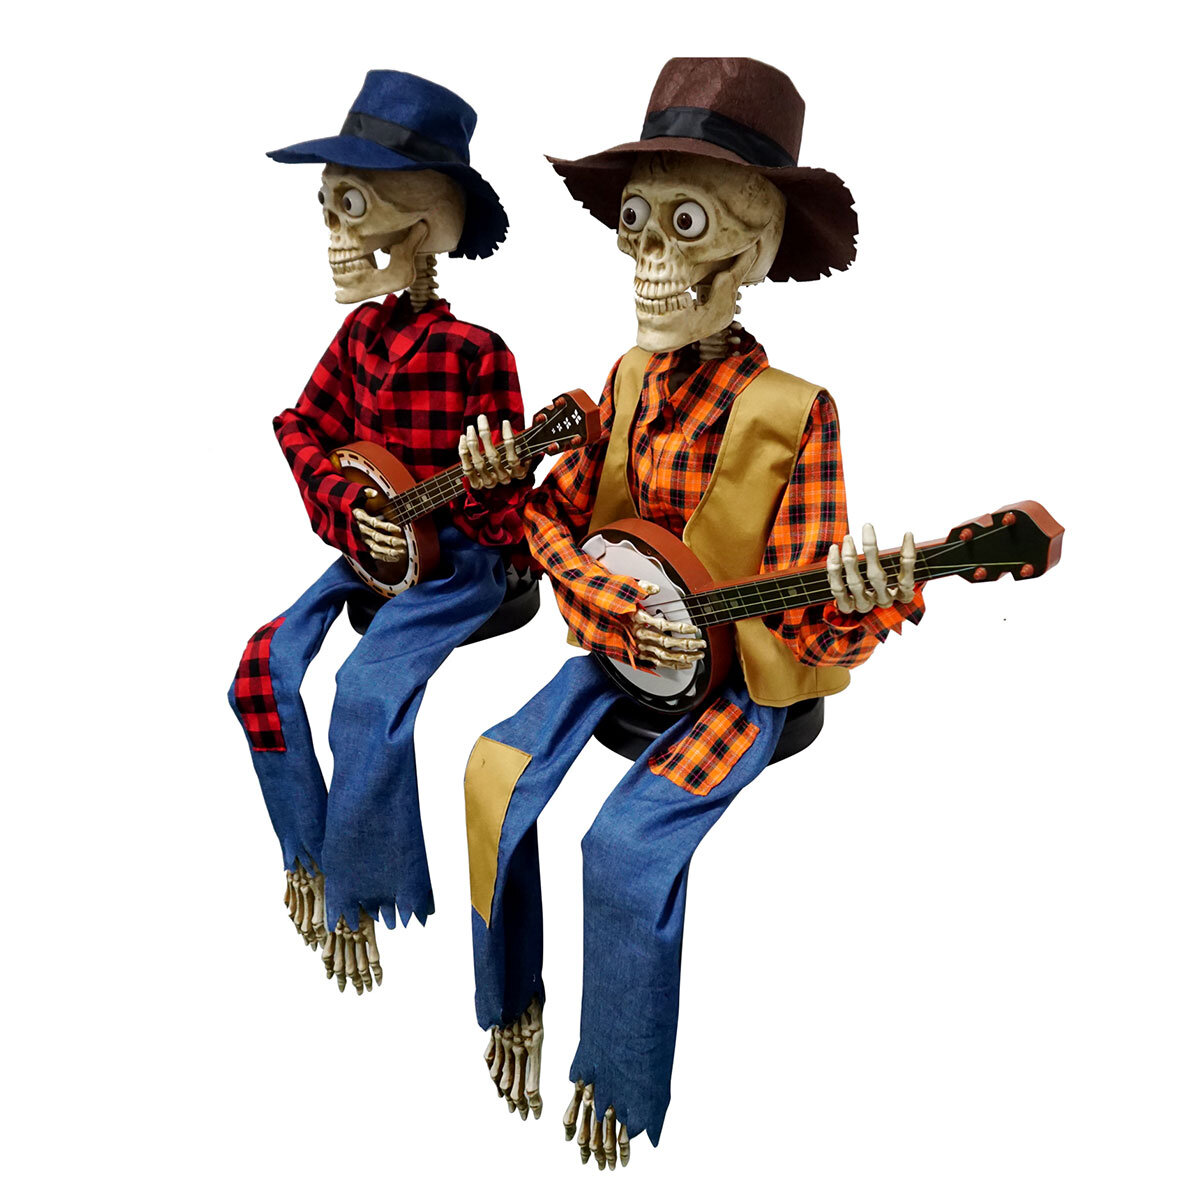 Buy Animated Banjo Skeletons Cut Out Image at Costco.co.uk